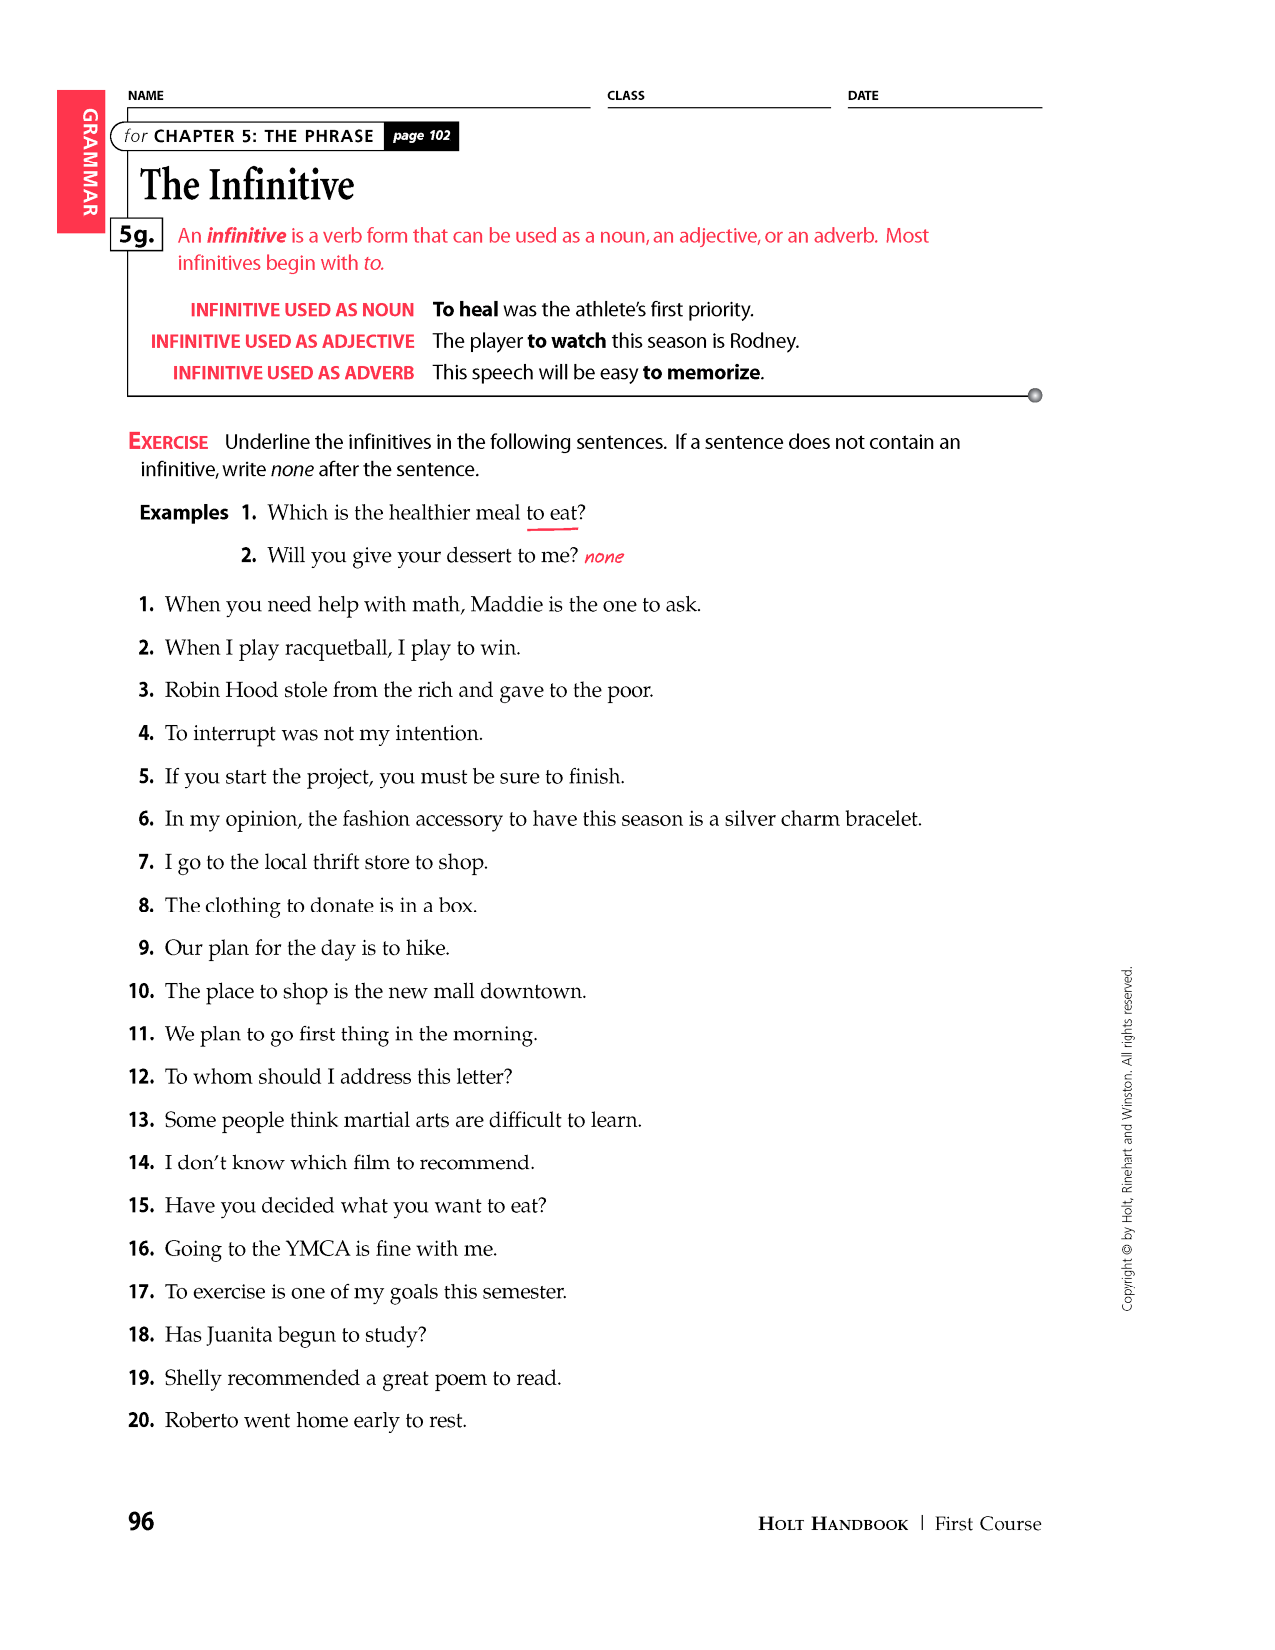 15-best-images-of-participle-phrase-worksheets-and-answers-gerund-and